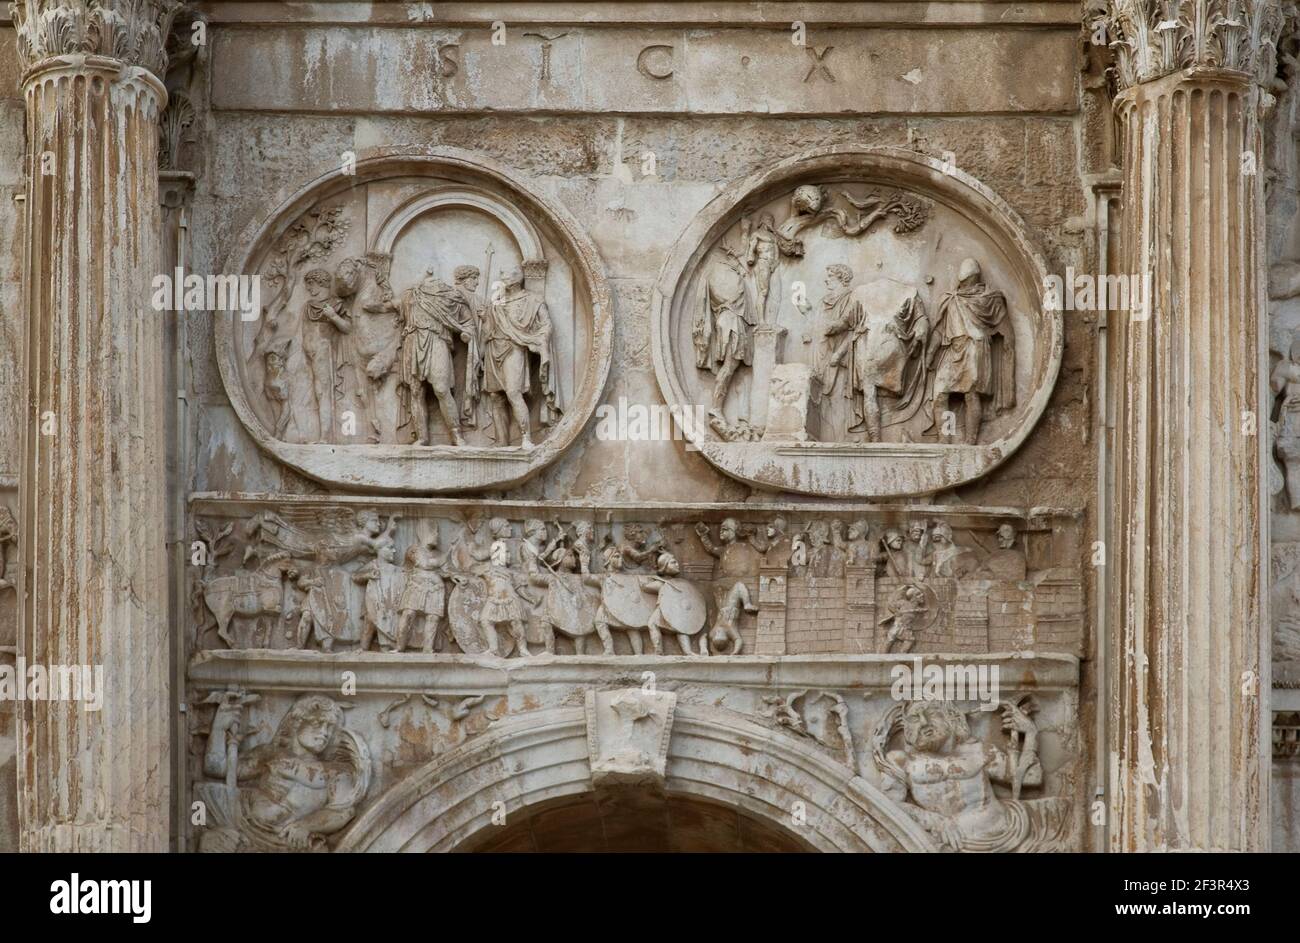 Detail from the triumphal Arch of Constantine, with spolia, reused reliefs from earlier monuments, from the Forum, Rome, Italy Stock Photo